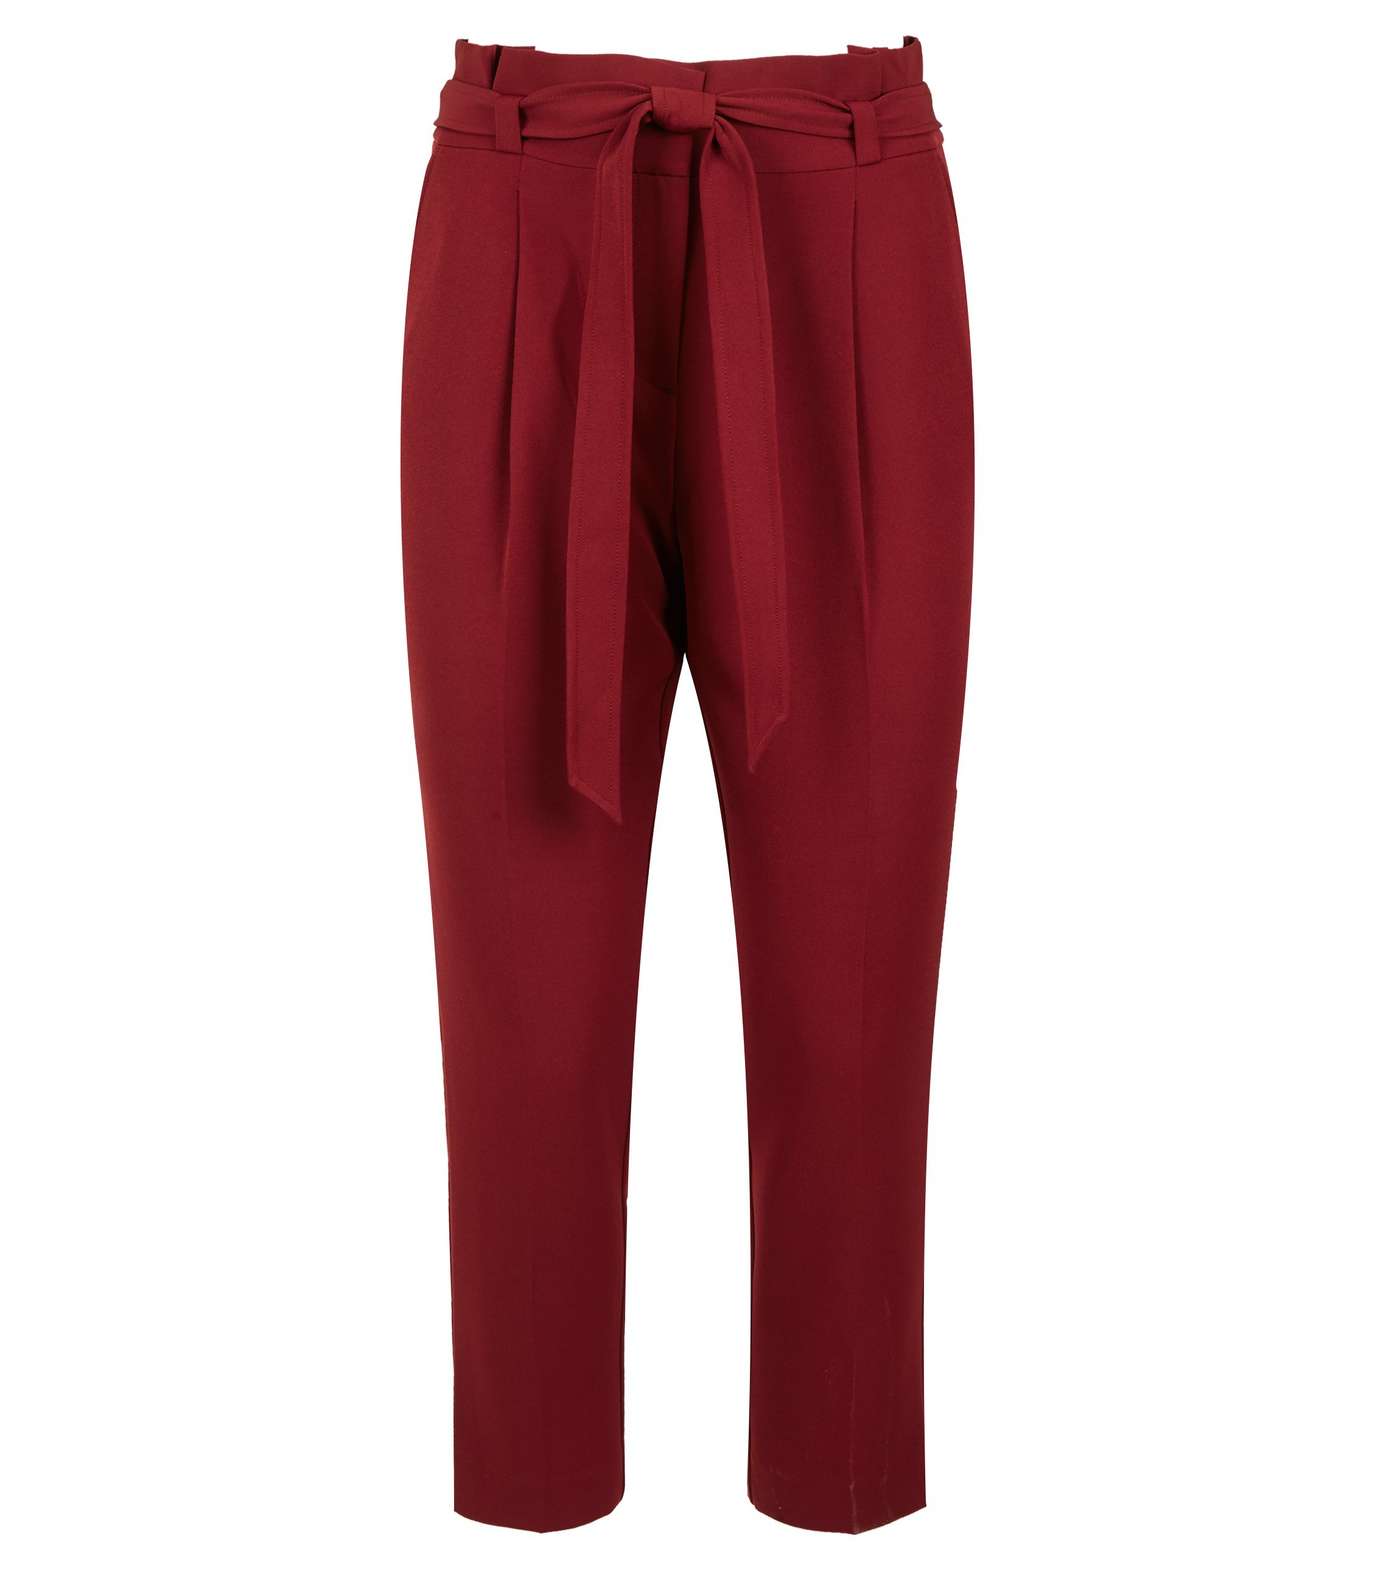 Petite Burgundy Belted Paperbag Waist Trousers Image 4